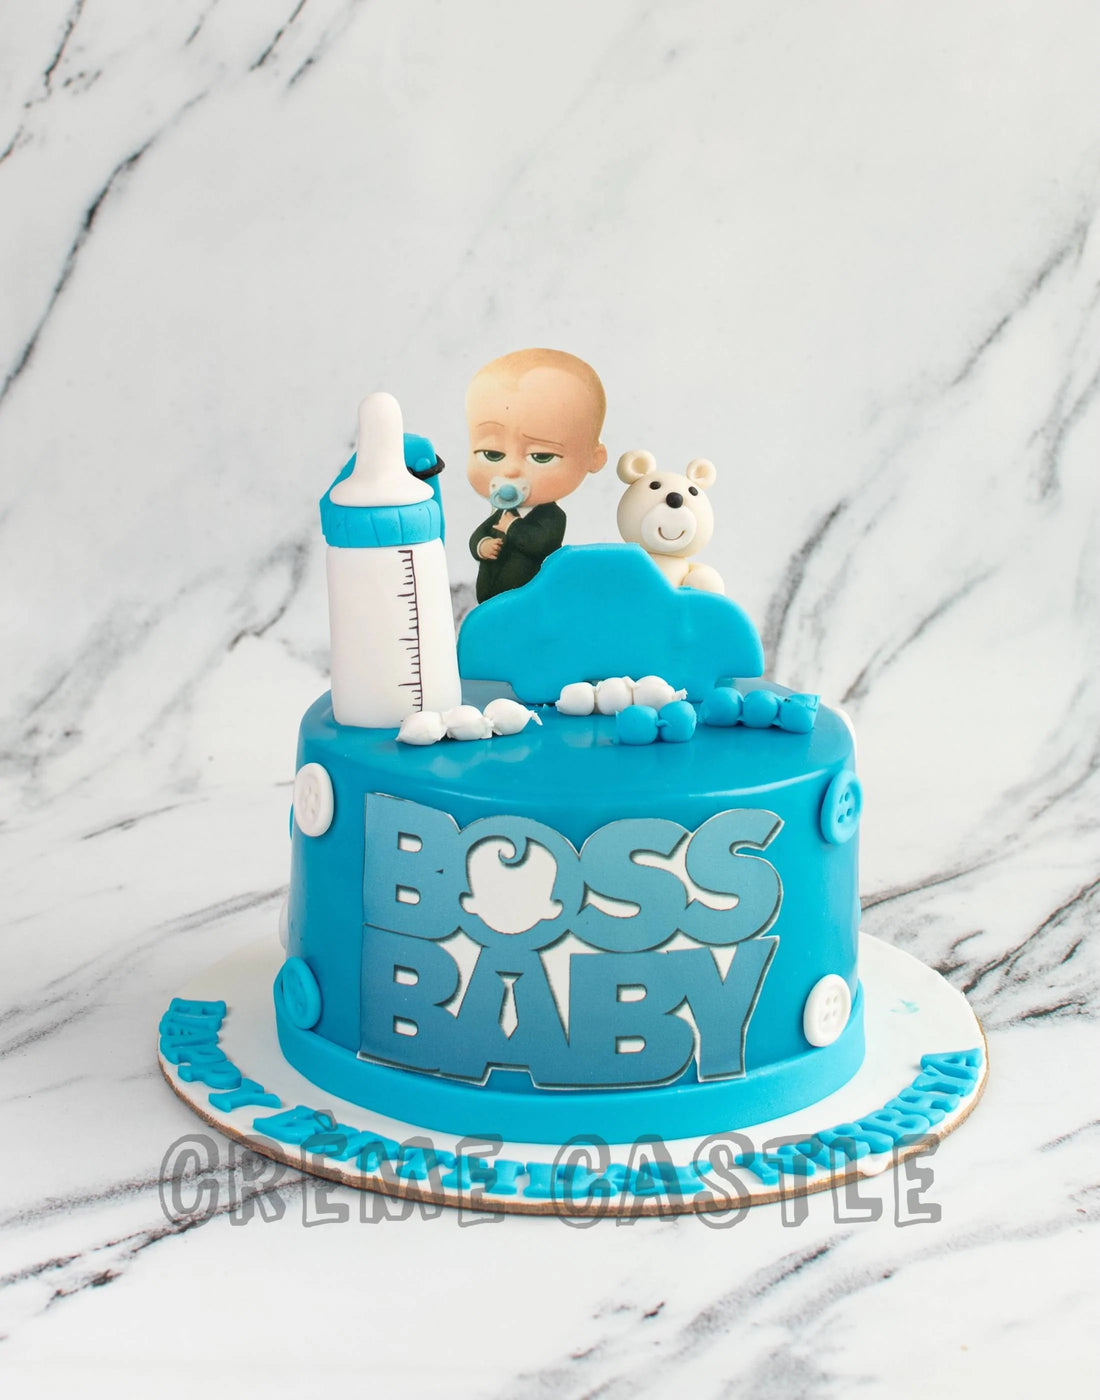 Boss Baby Cake in Blue by Creme Castle